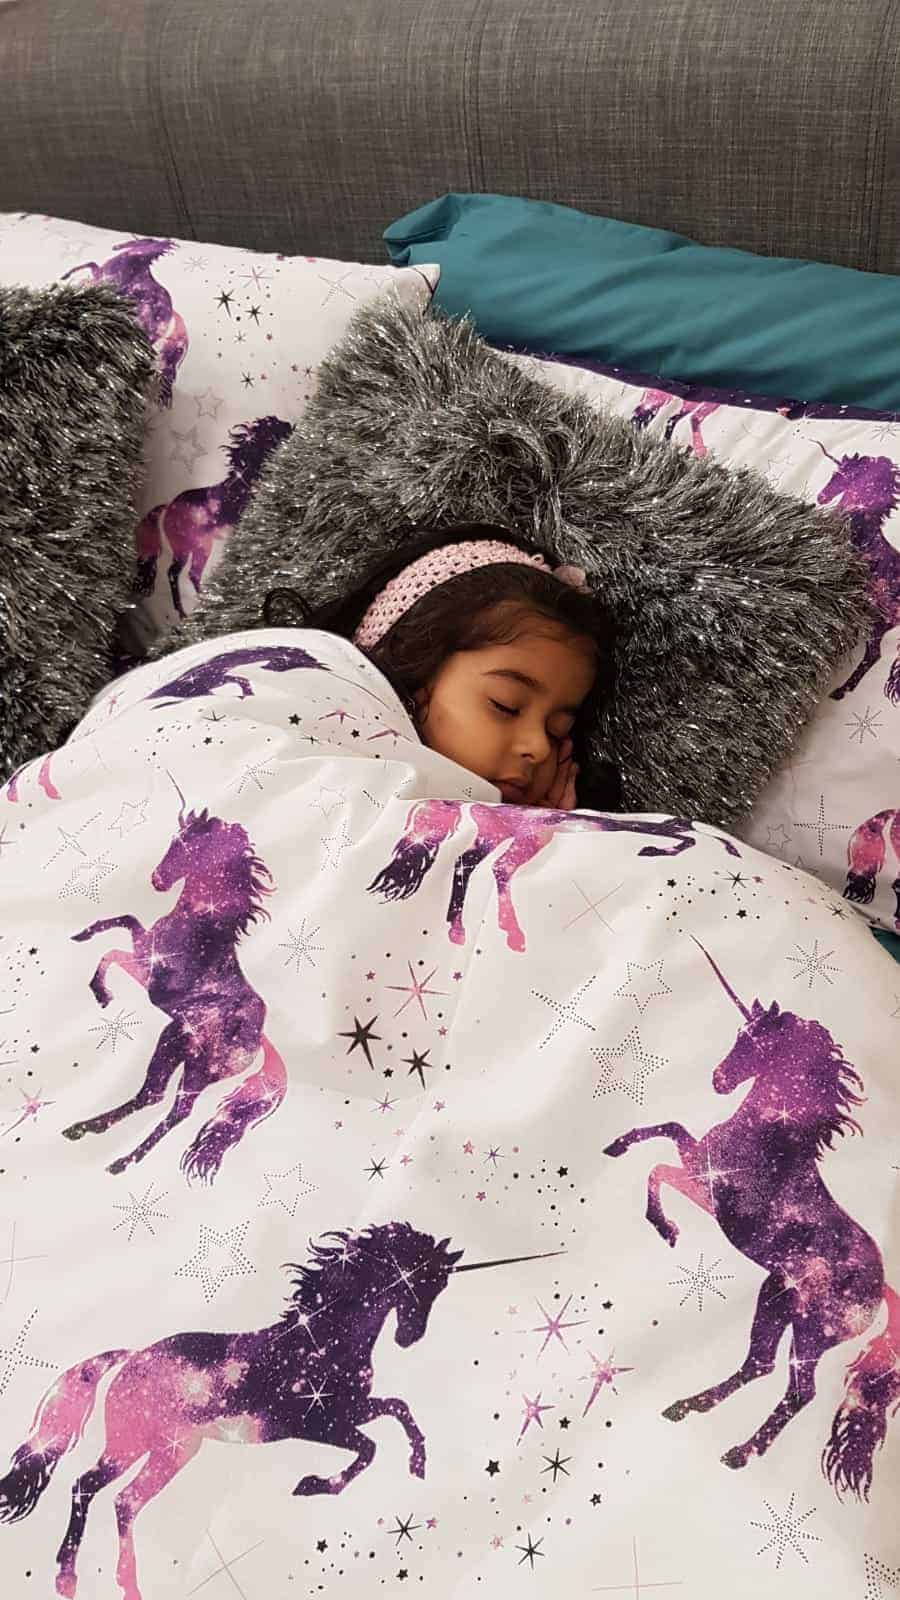 Young girl sleeping in a bed with purple unicorn duvet